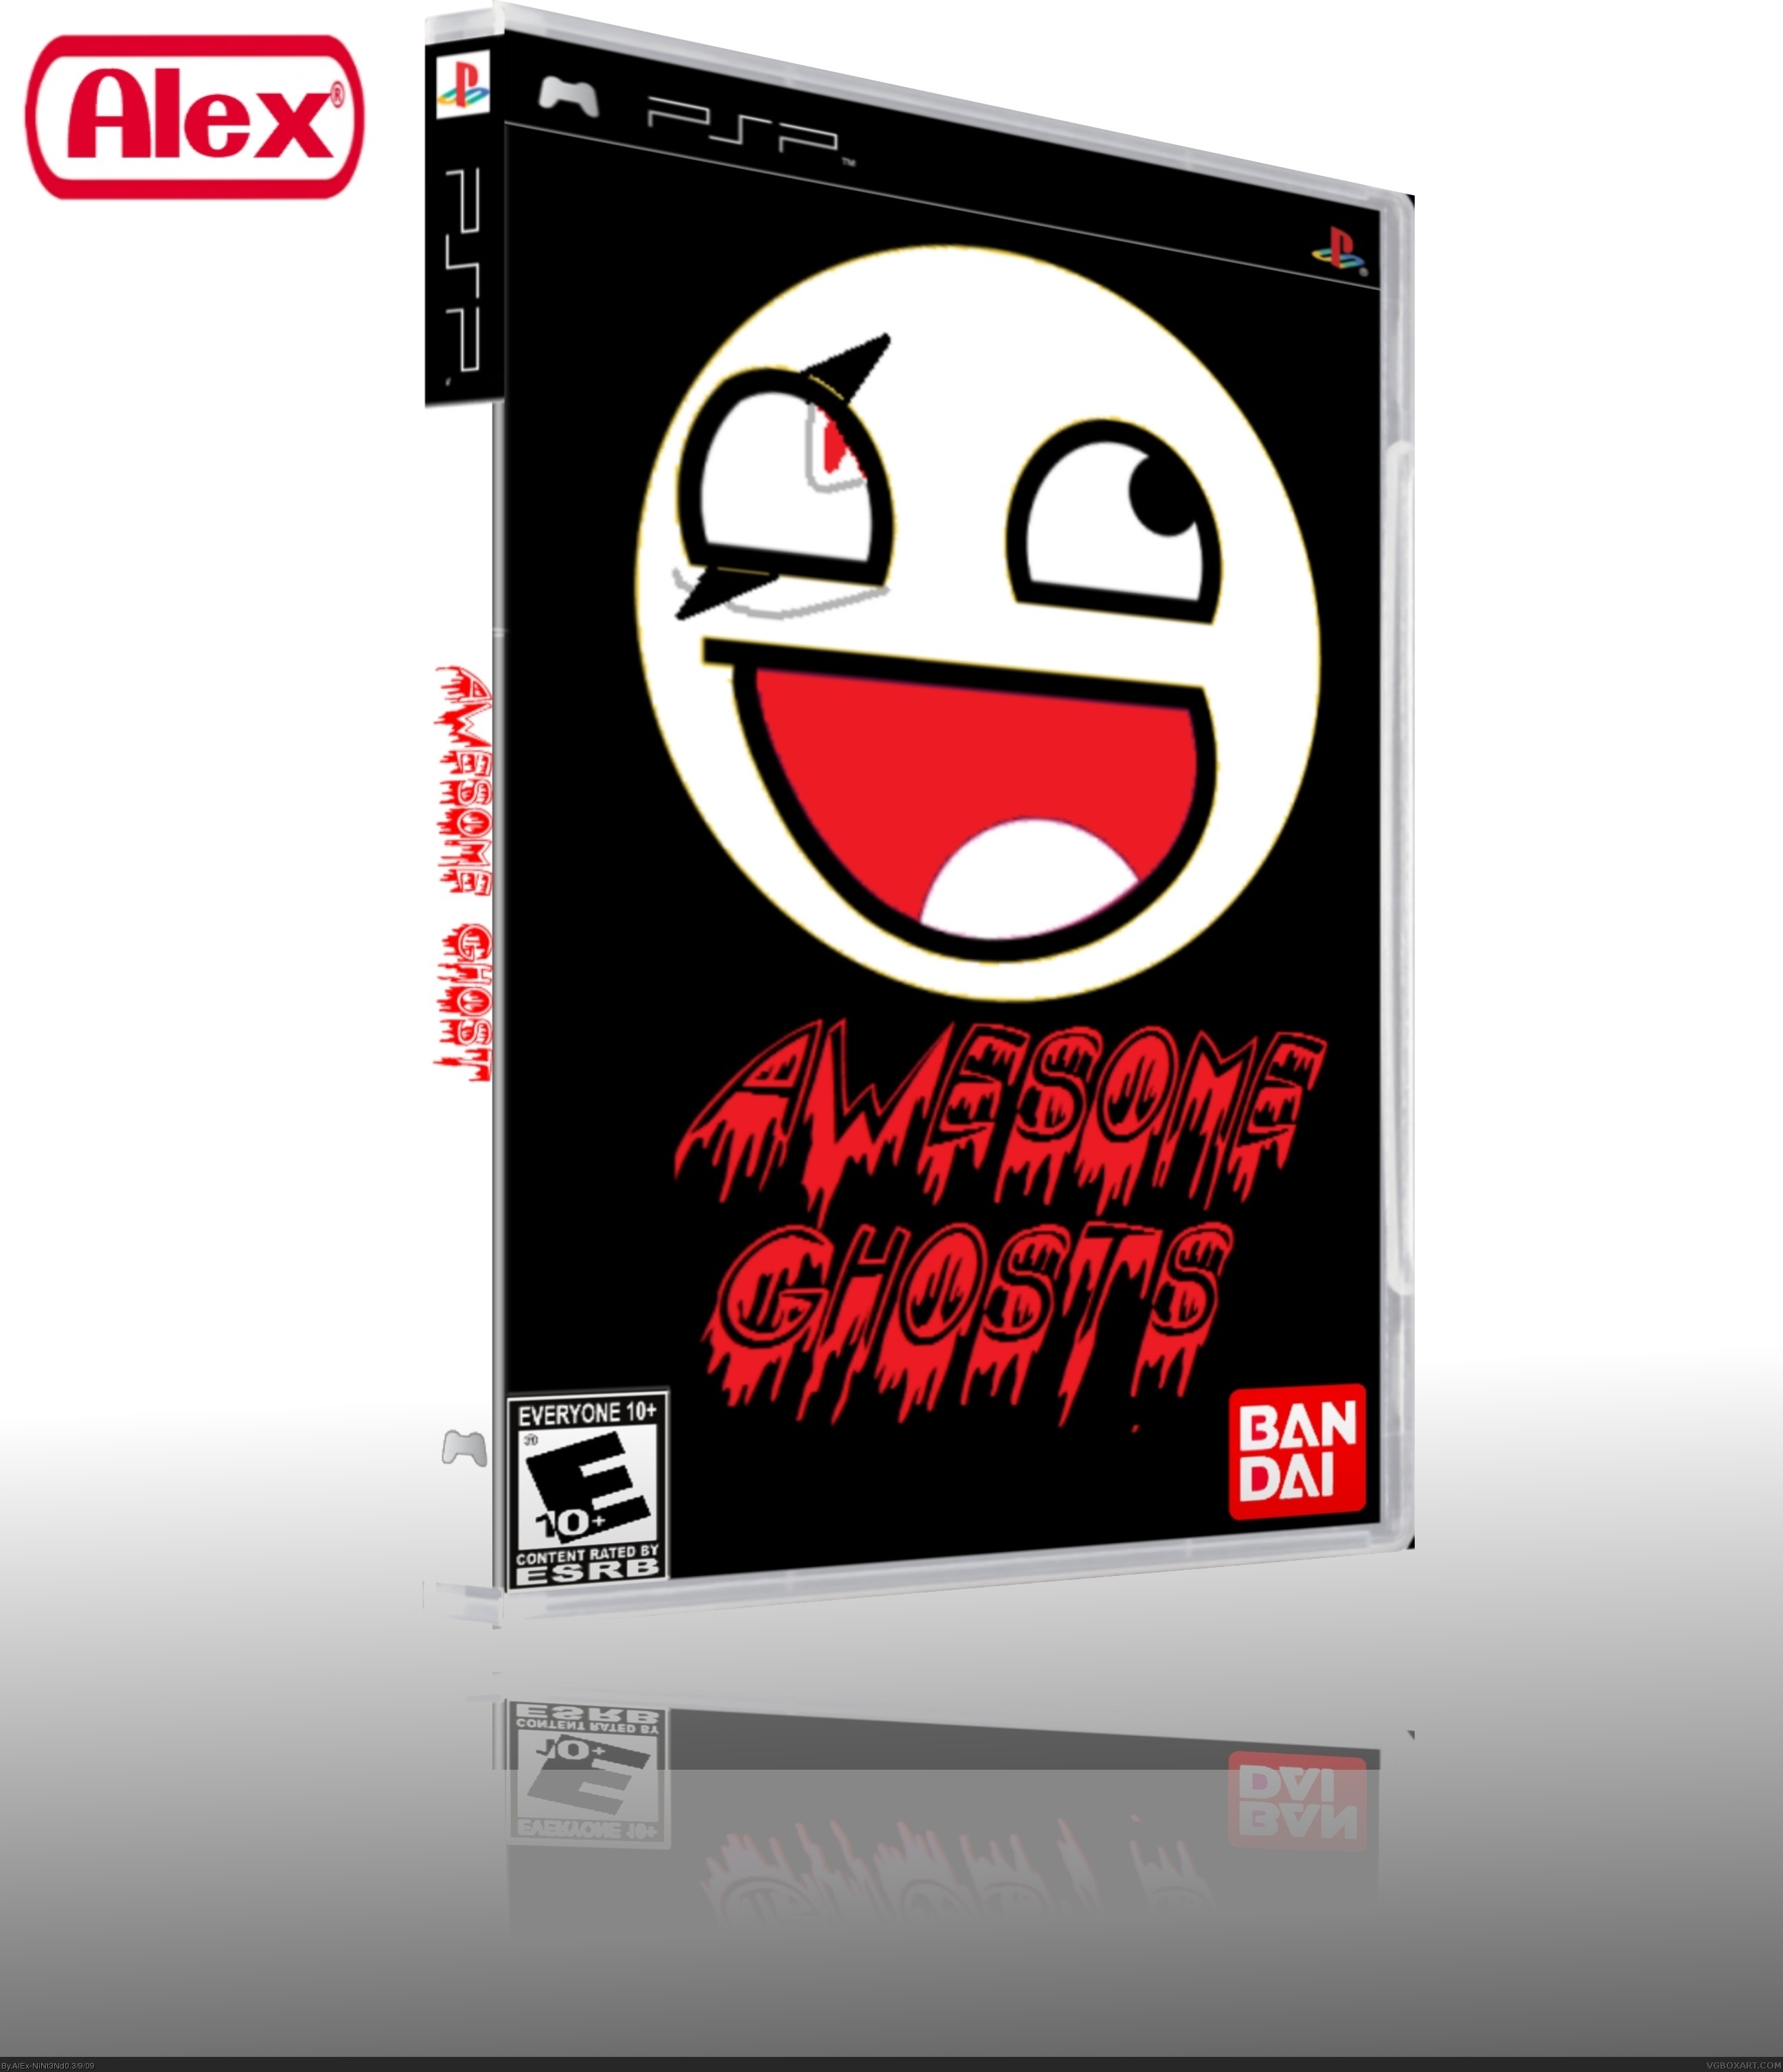 Awesome: Ghosts box cover